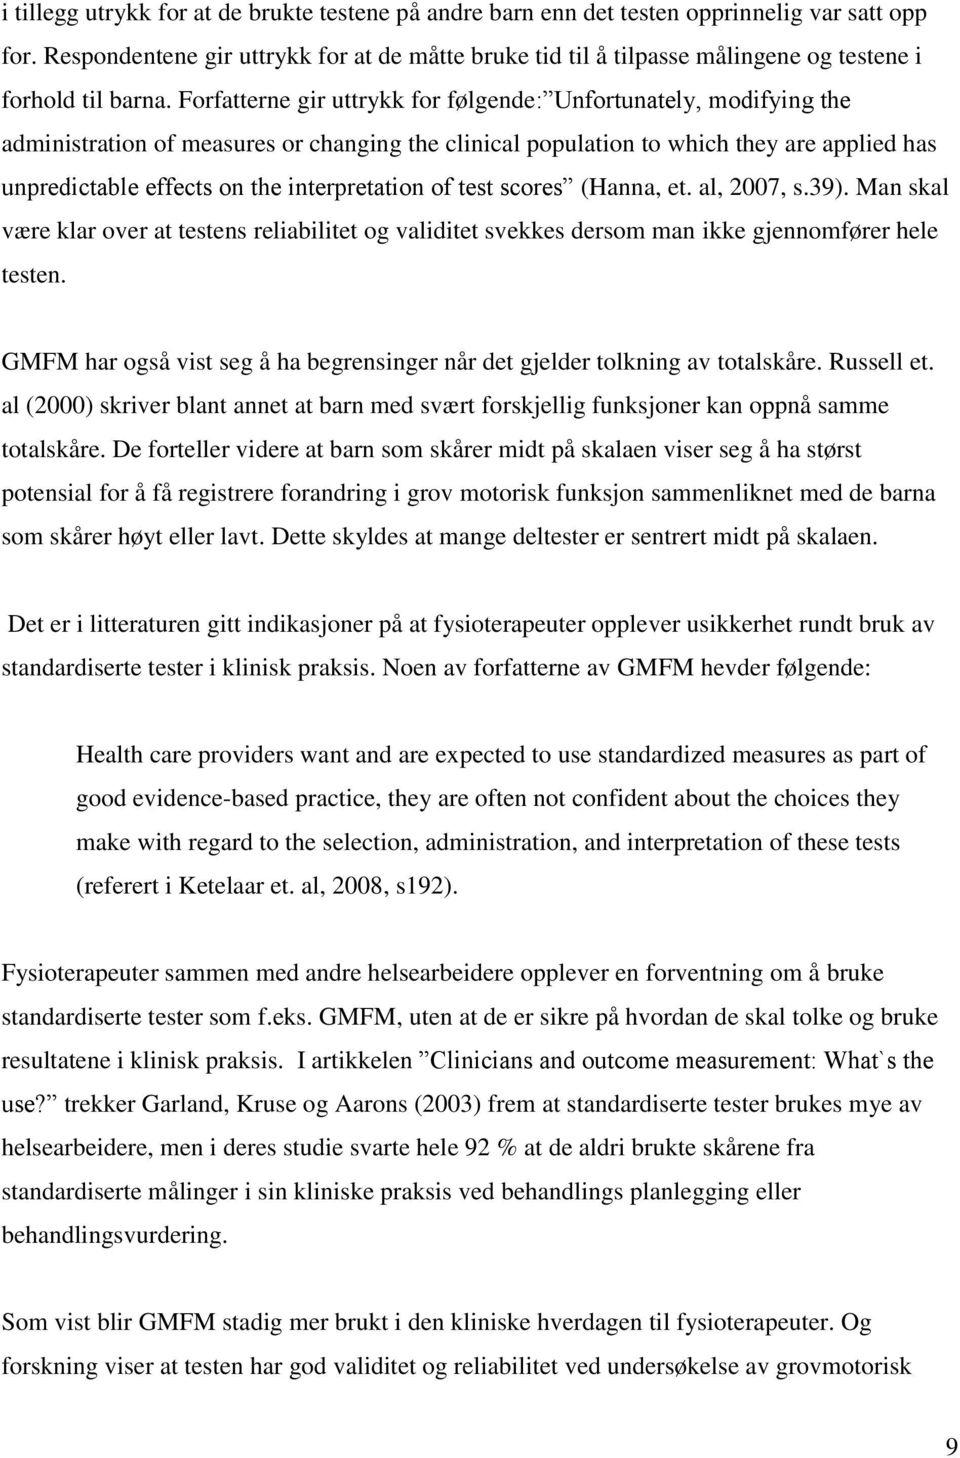 Forfatterne gir uttrykk for følgende: Unfortunately, modifying the administration of measures or changing the clinical population to which they are applied has unpredictable effects on the